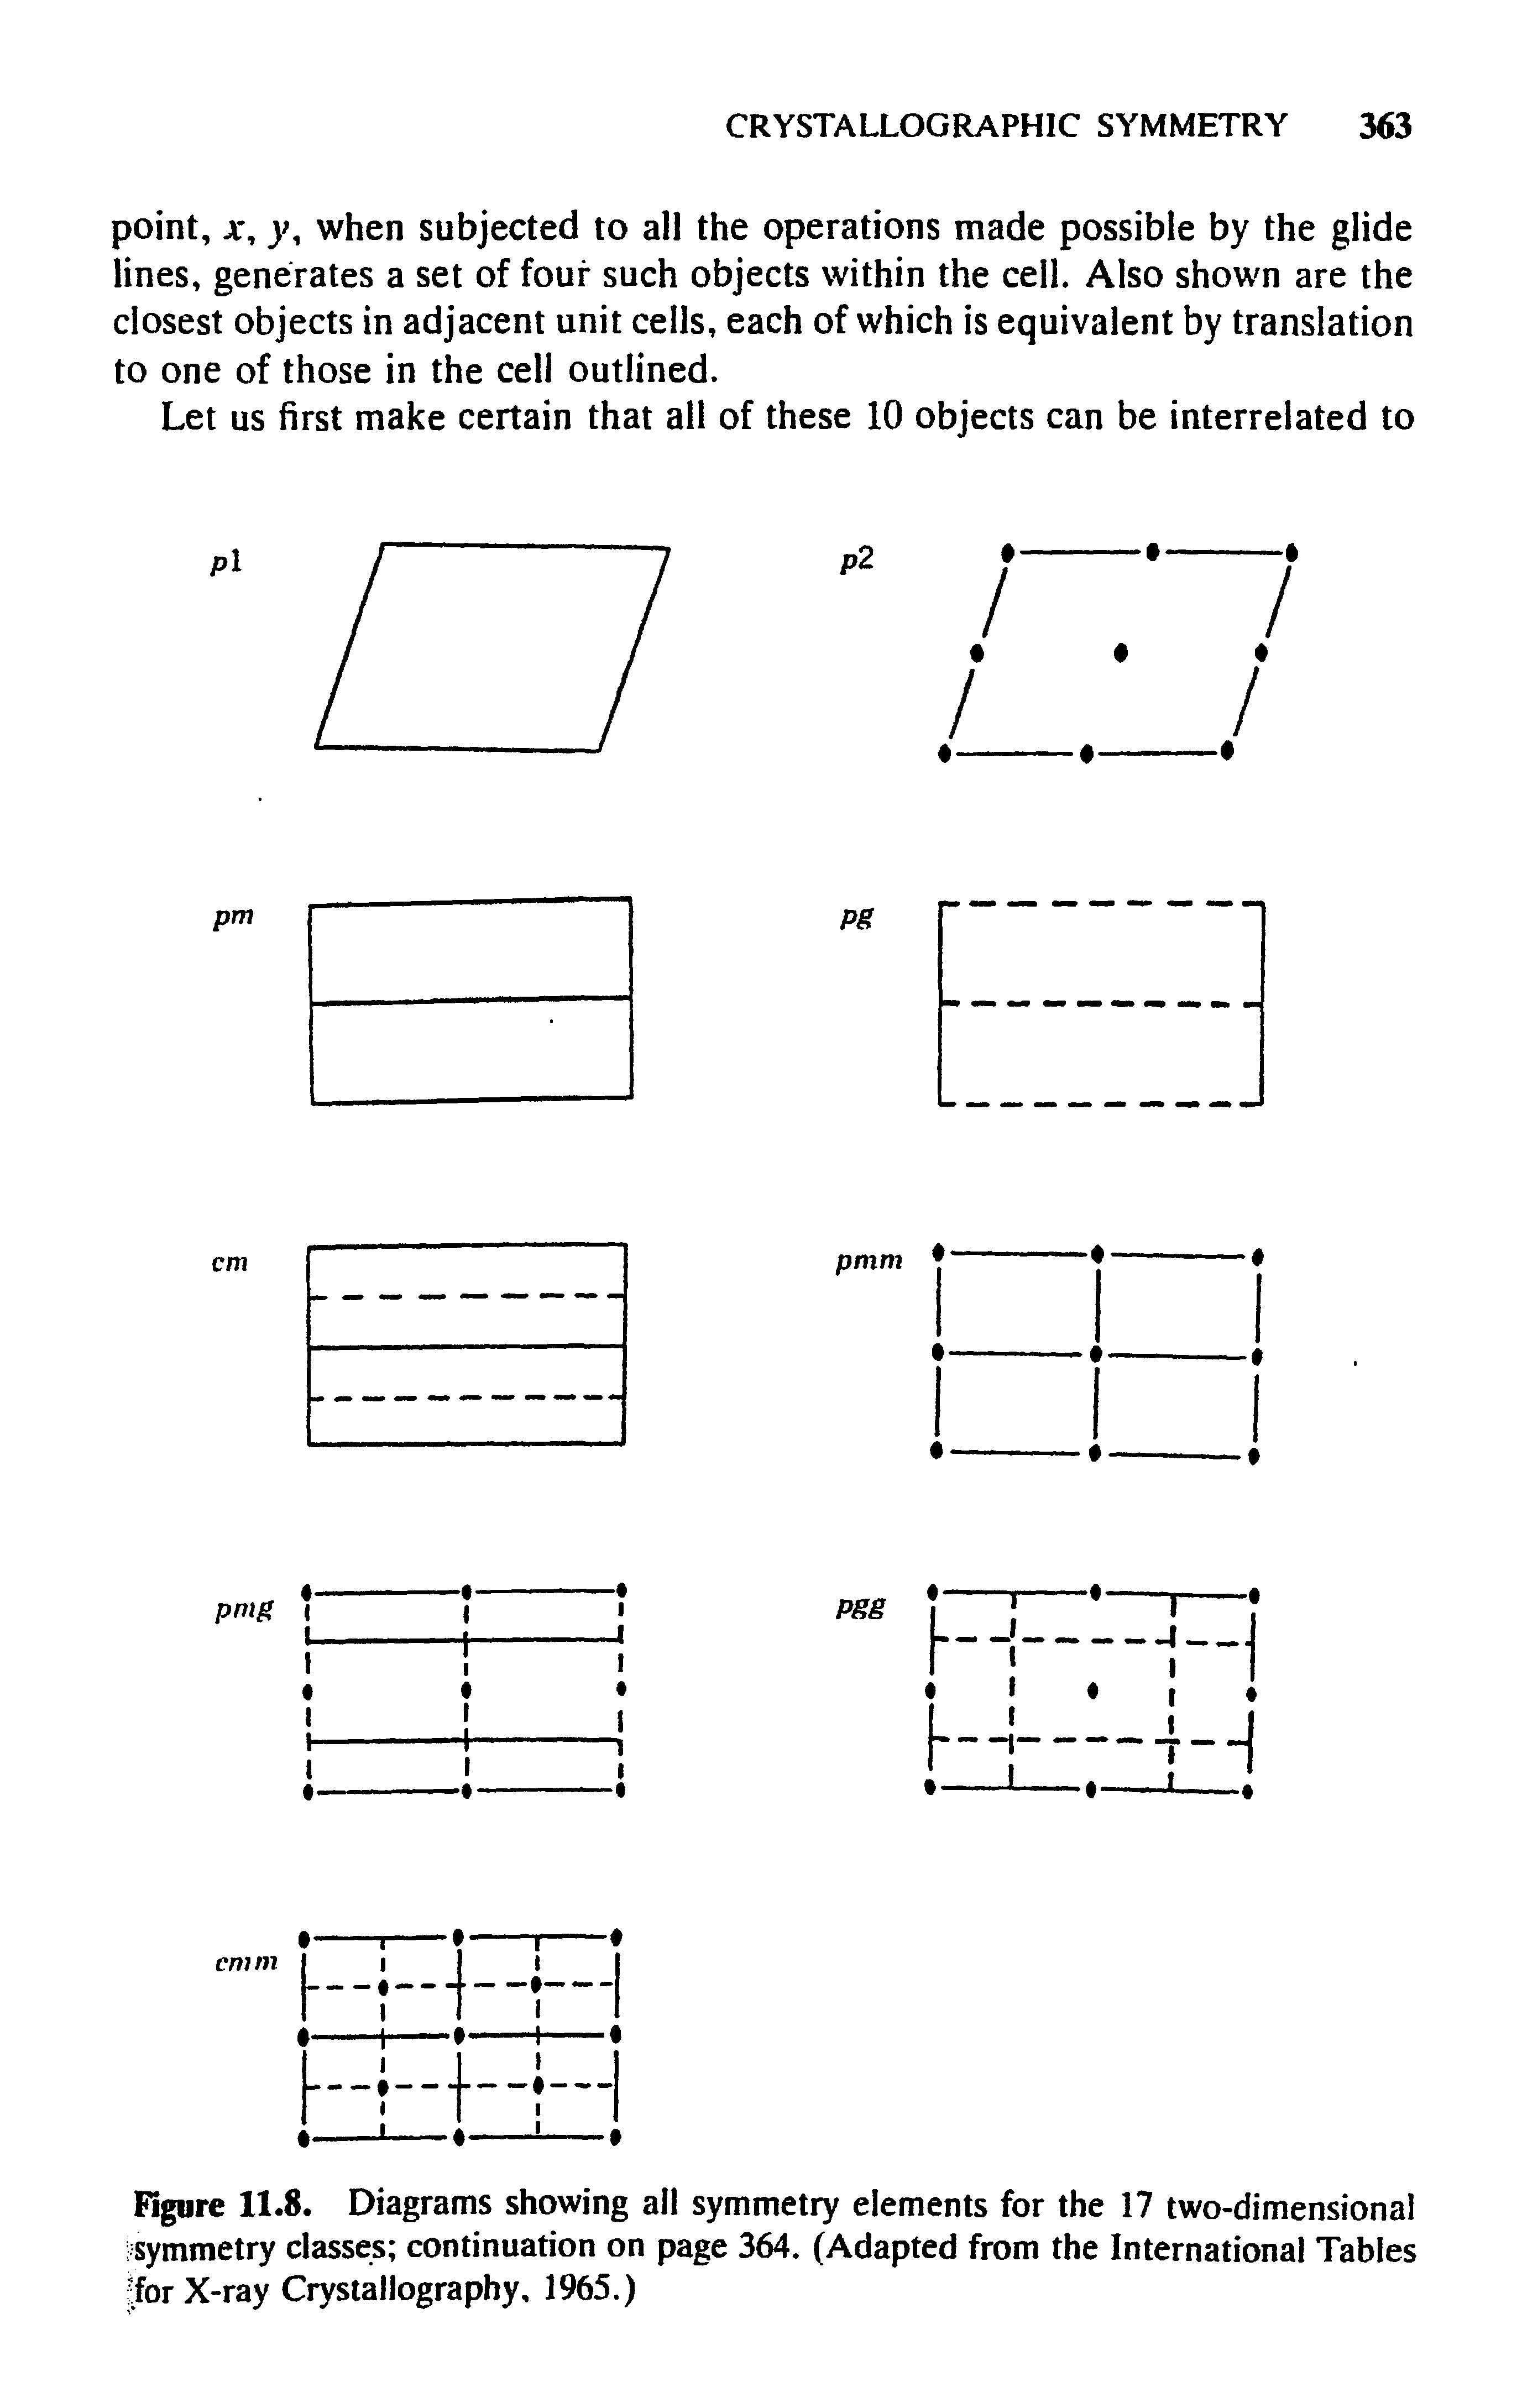 Figure 11.8. Diagrams showing ail symmetry elements for the 17 two-dimensional symmetry classes continuation on page 364. (Adapted from the International Tables tfor X-ray Crystallography, 1965.)...